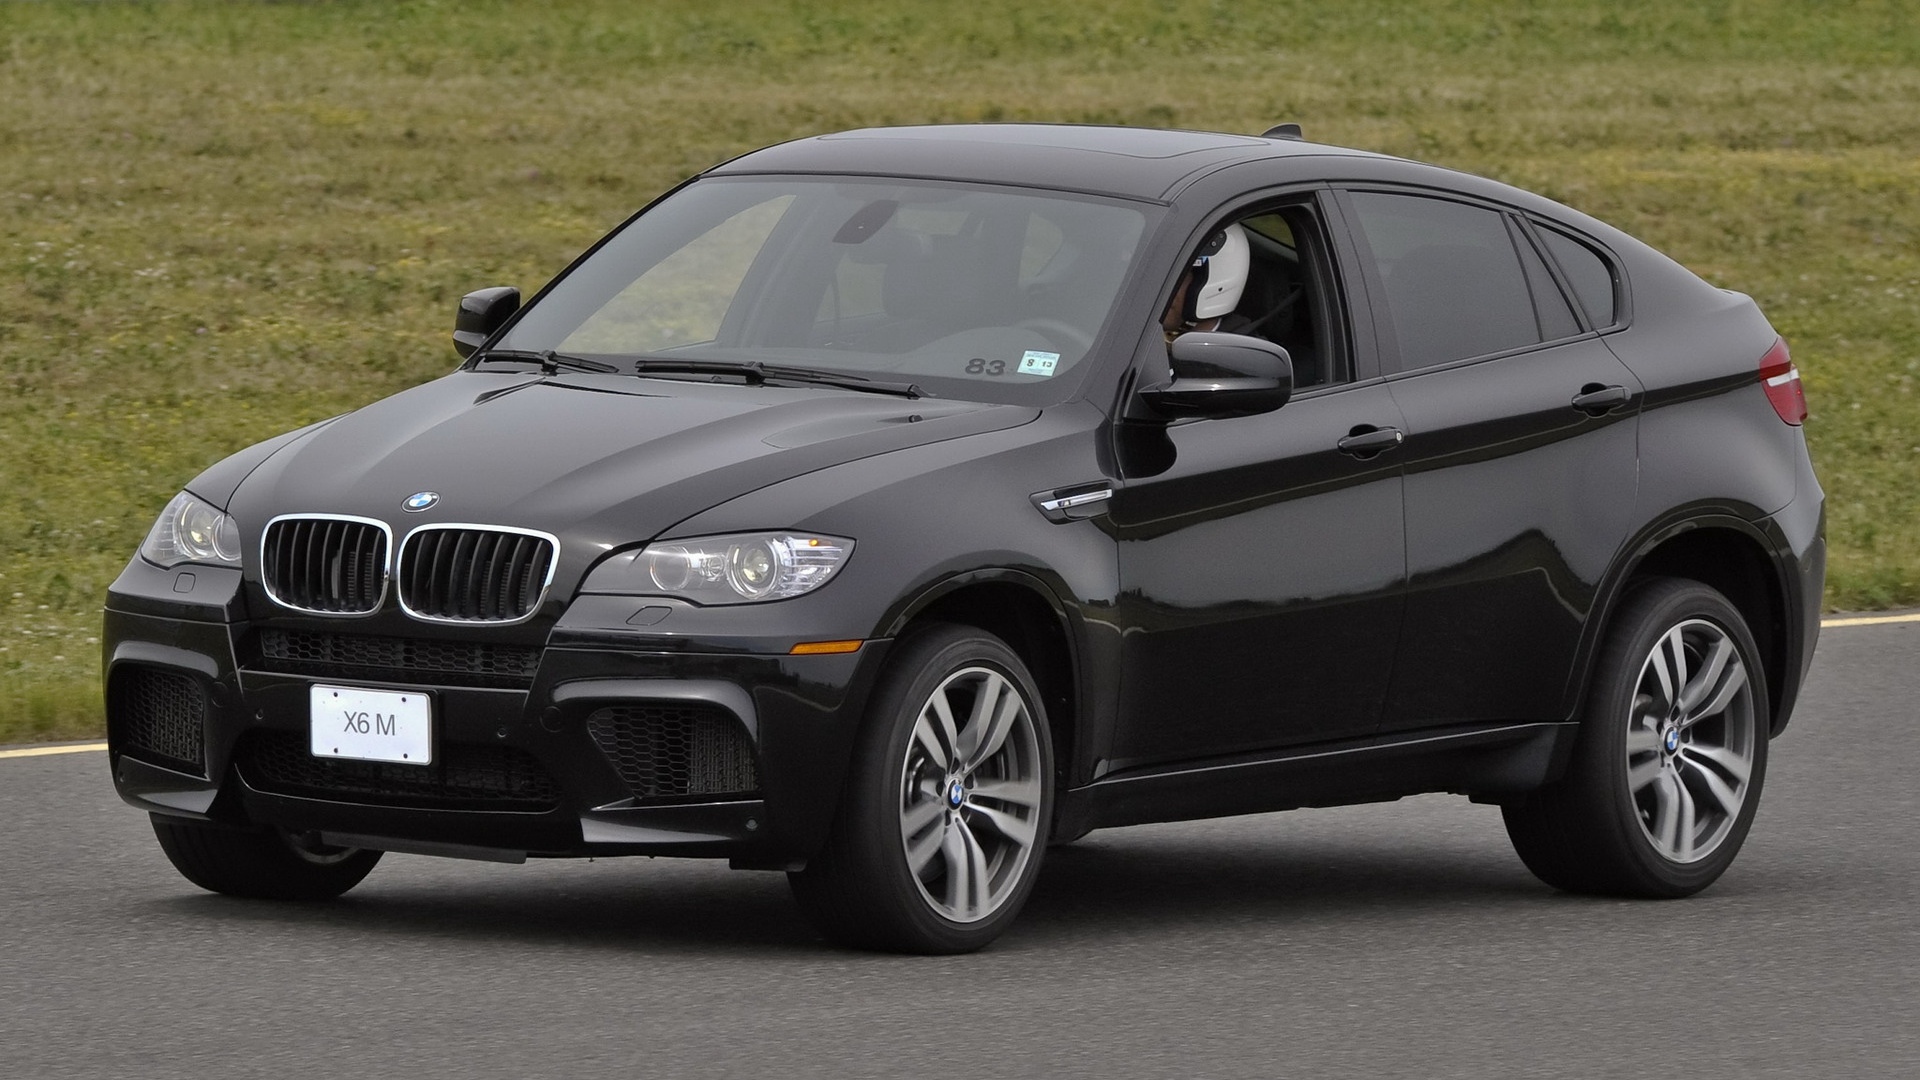 2010 BMW X6 M (US) - Wallpapers and HD Images | Car Pixel